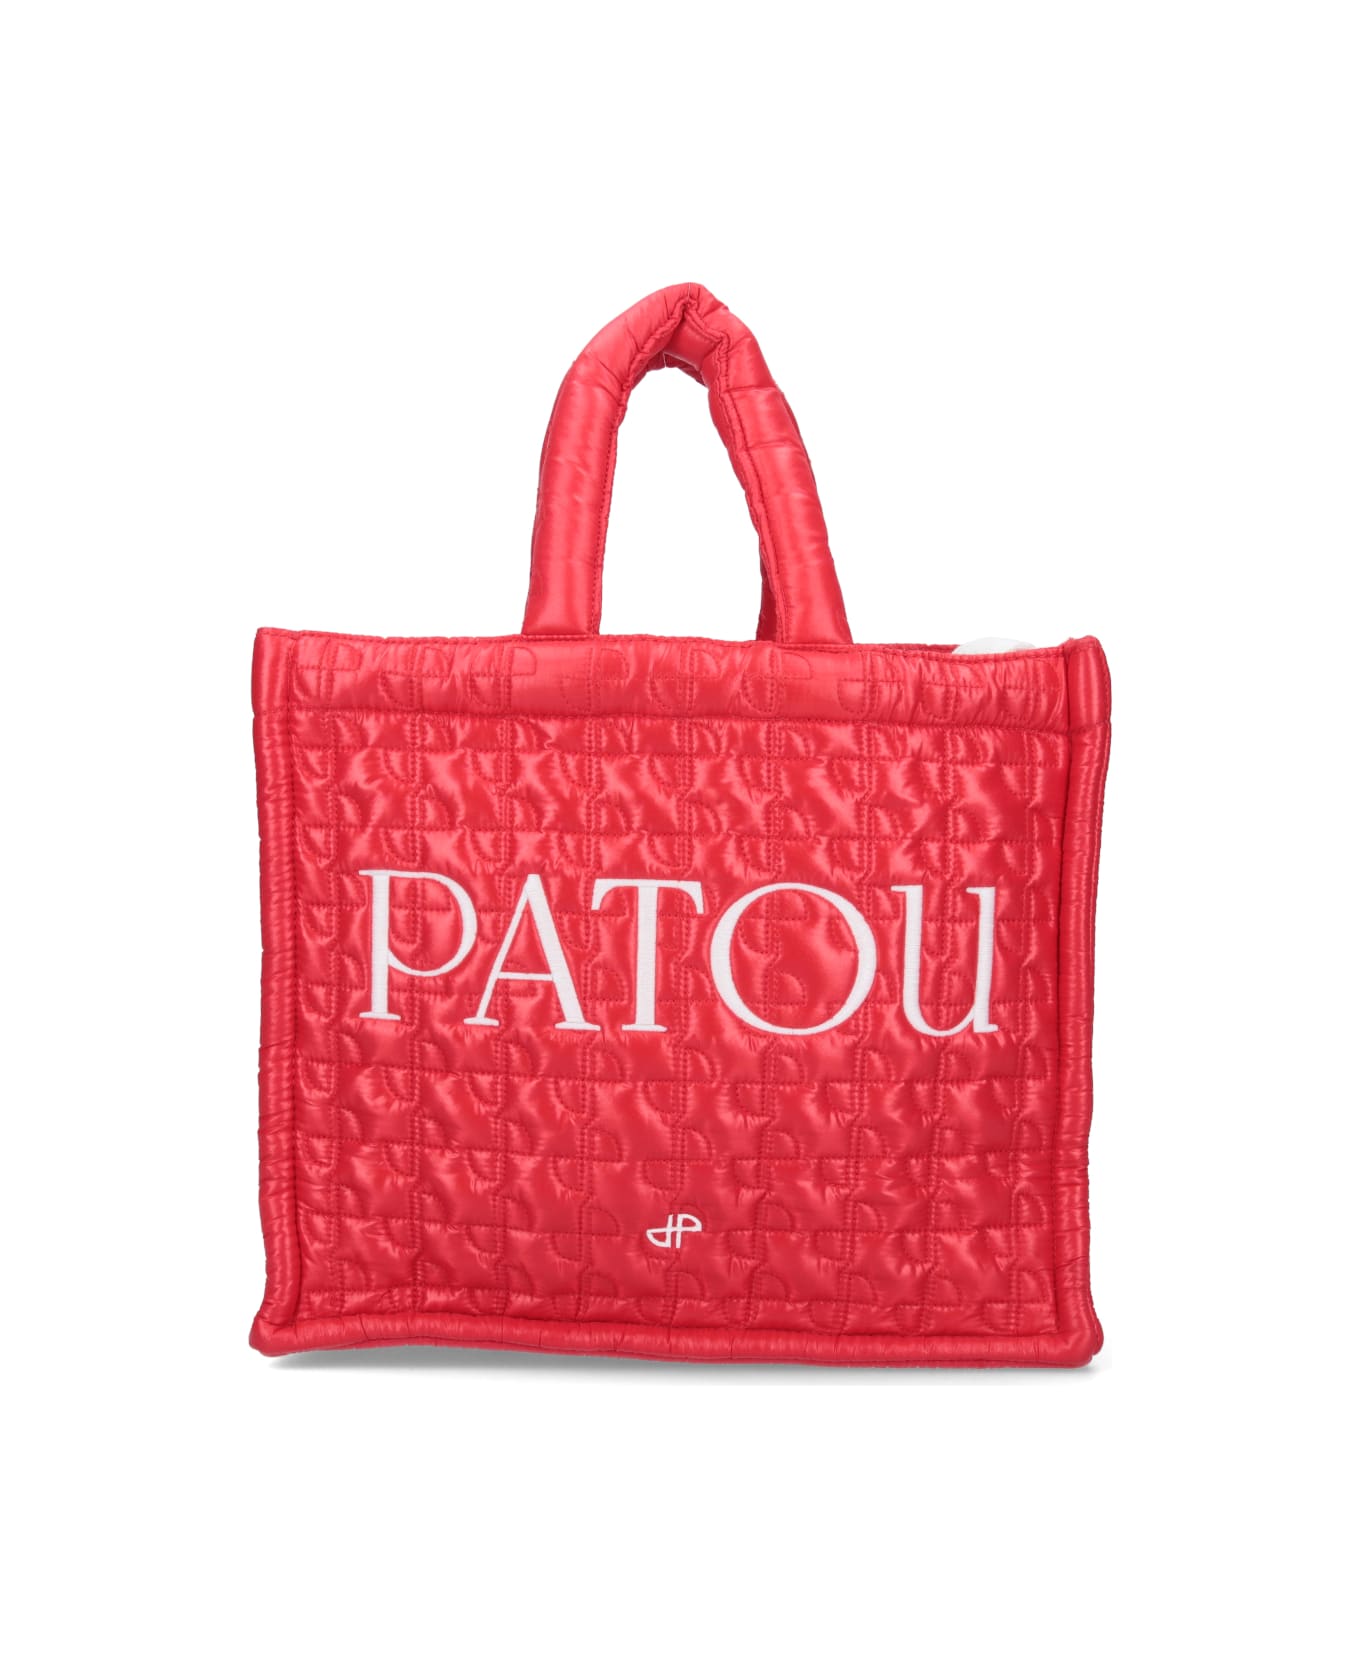 Patou Small Quilted Tote Bag - Red トートバッグ